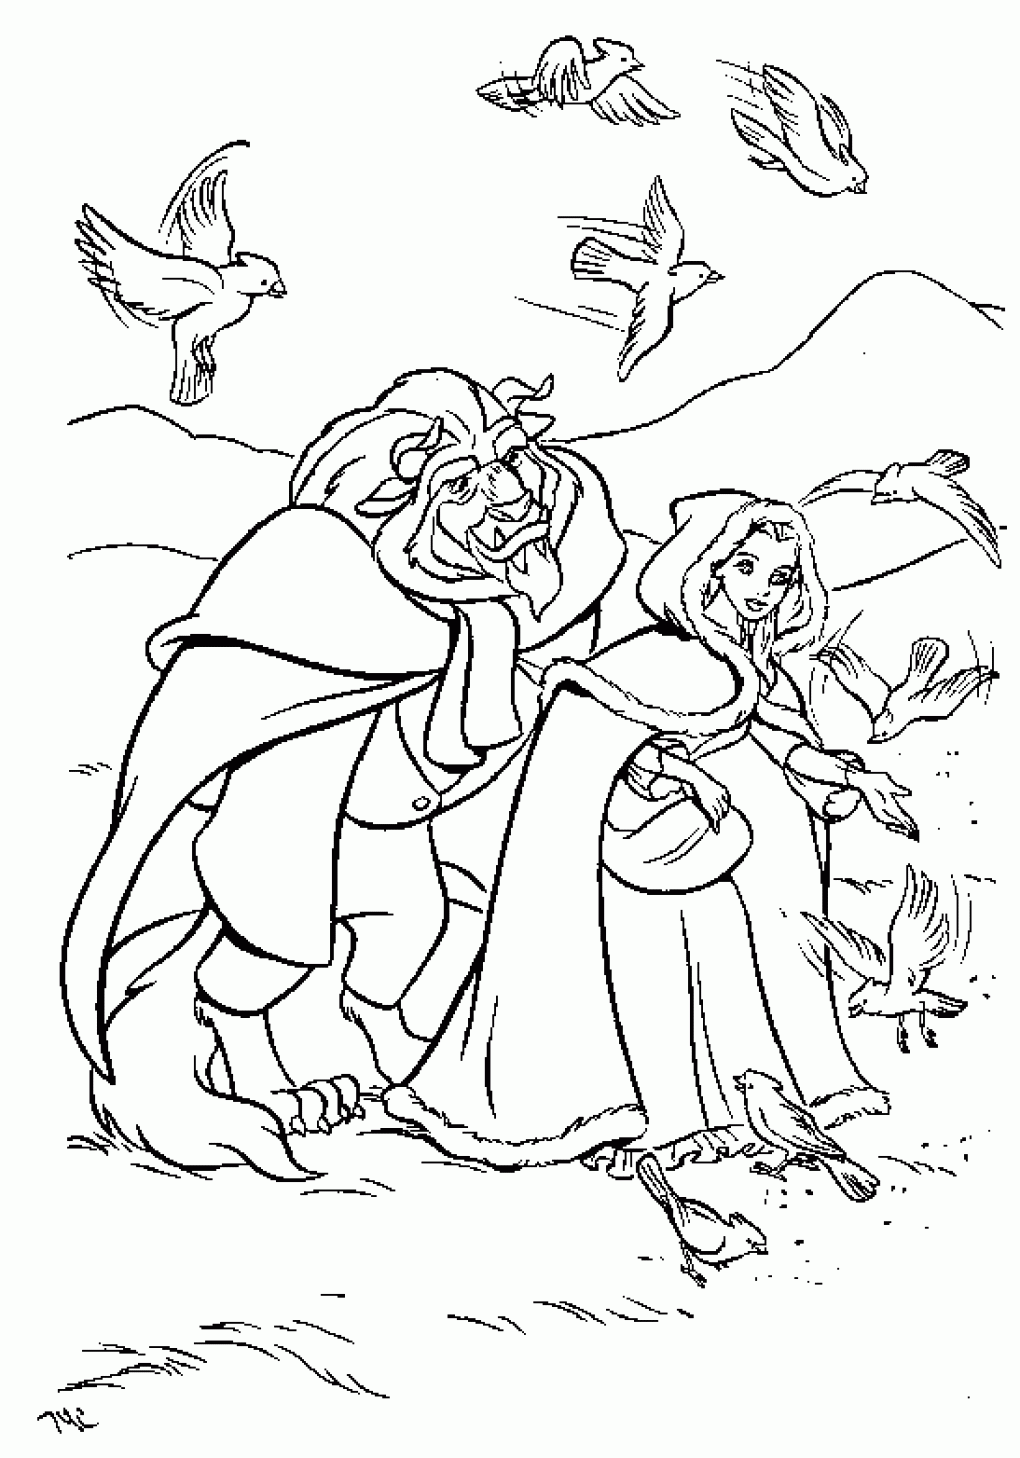 beauty and the beast coloring pages beauty and the beast coloring pages print and colorcom beauty and the coloring beast pages 